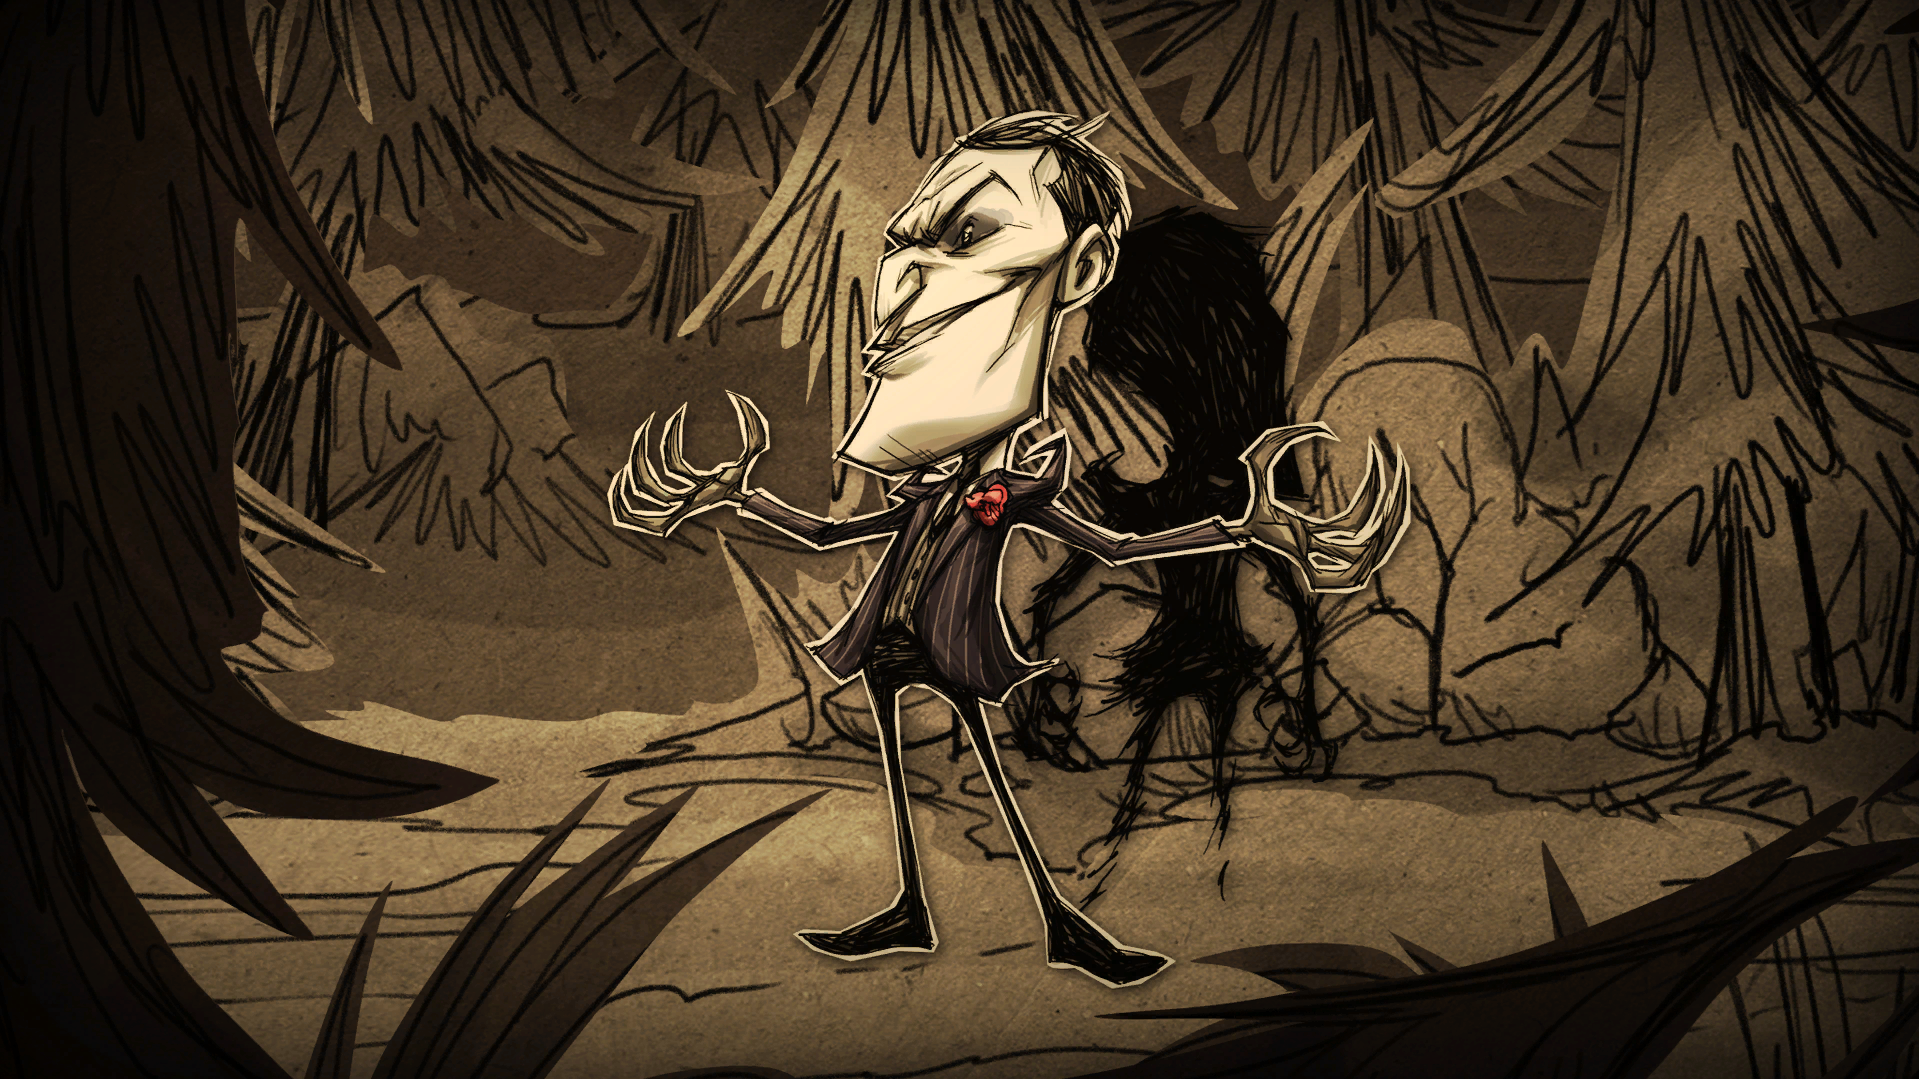 Don t starve starving games. Don t Starve Максвелл. Don t Starve together Максвелл. Персонаж Максвел dont Starve together. Dont start together Максвелл.